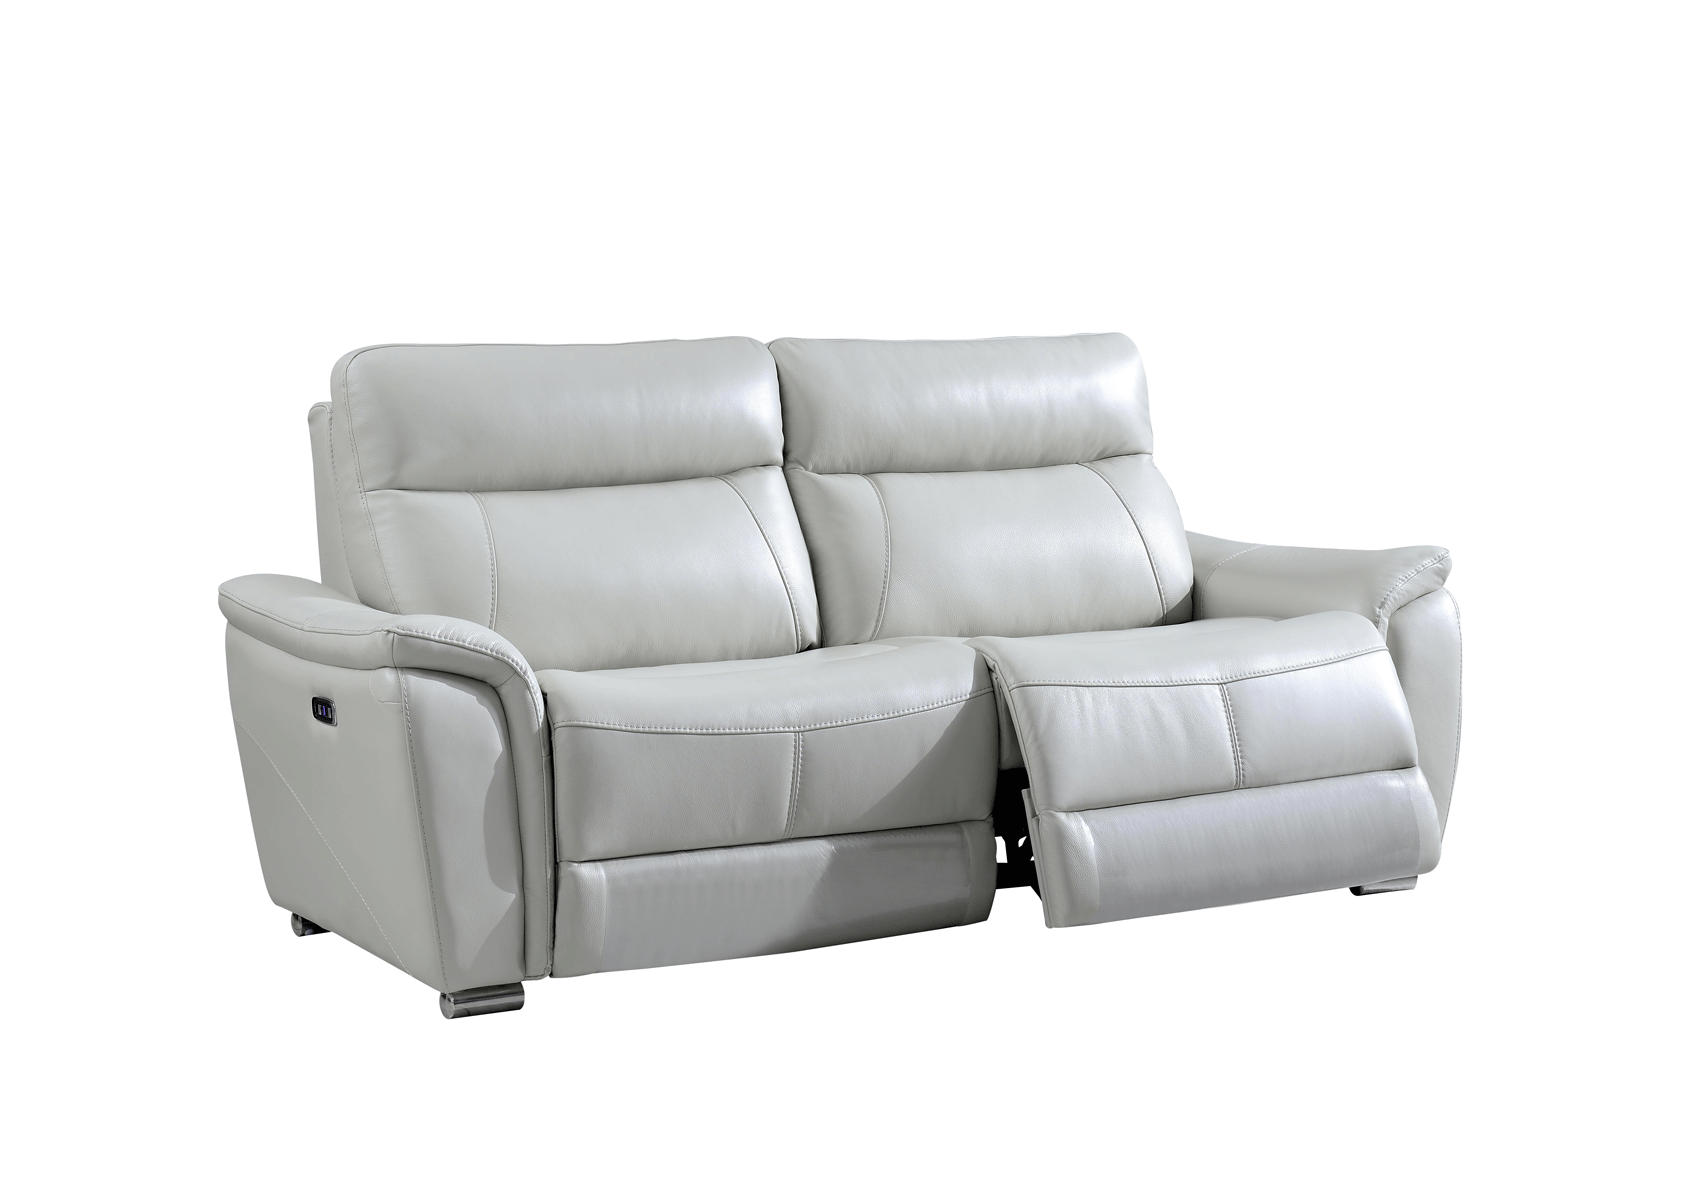 1705 Light-Grey with Electric Recliners, Sofas Loveseats and Chairs